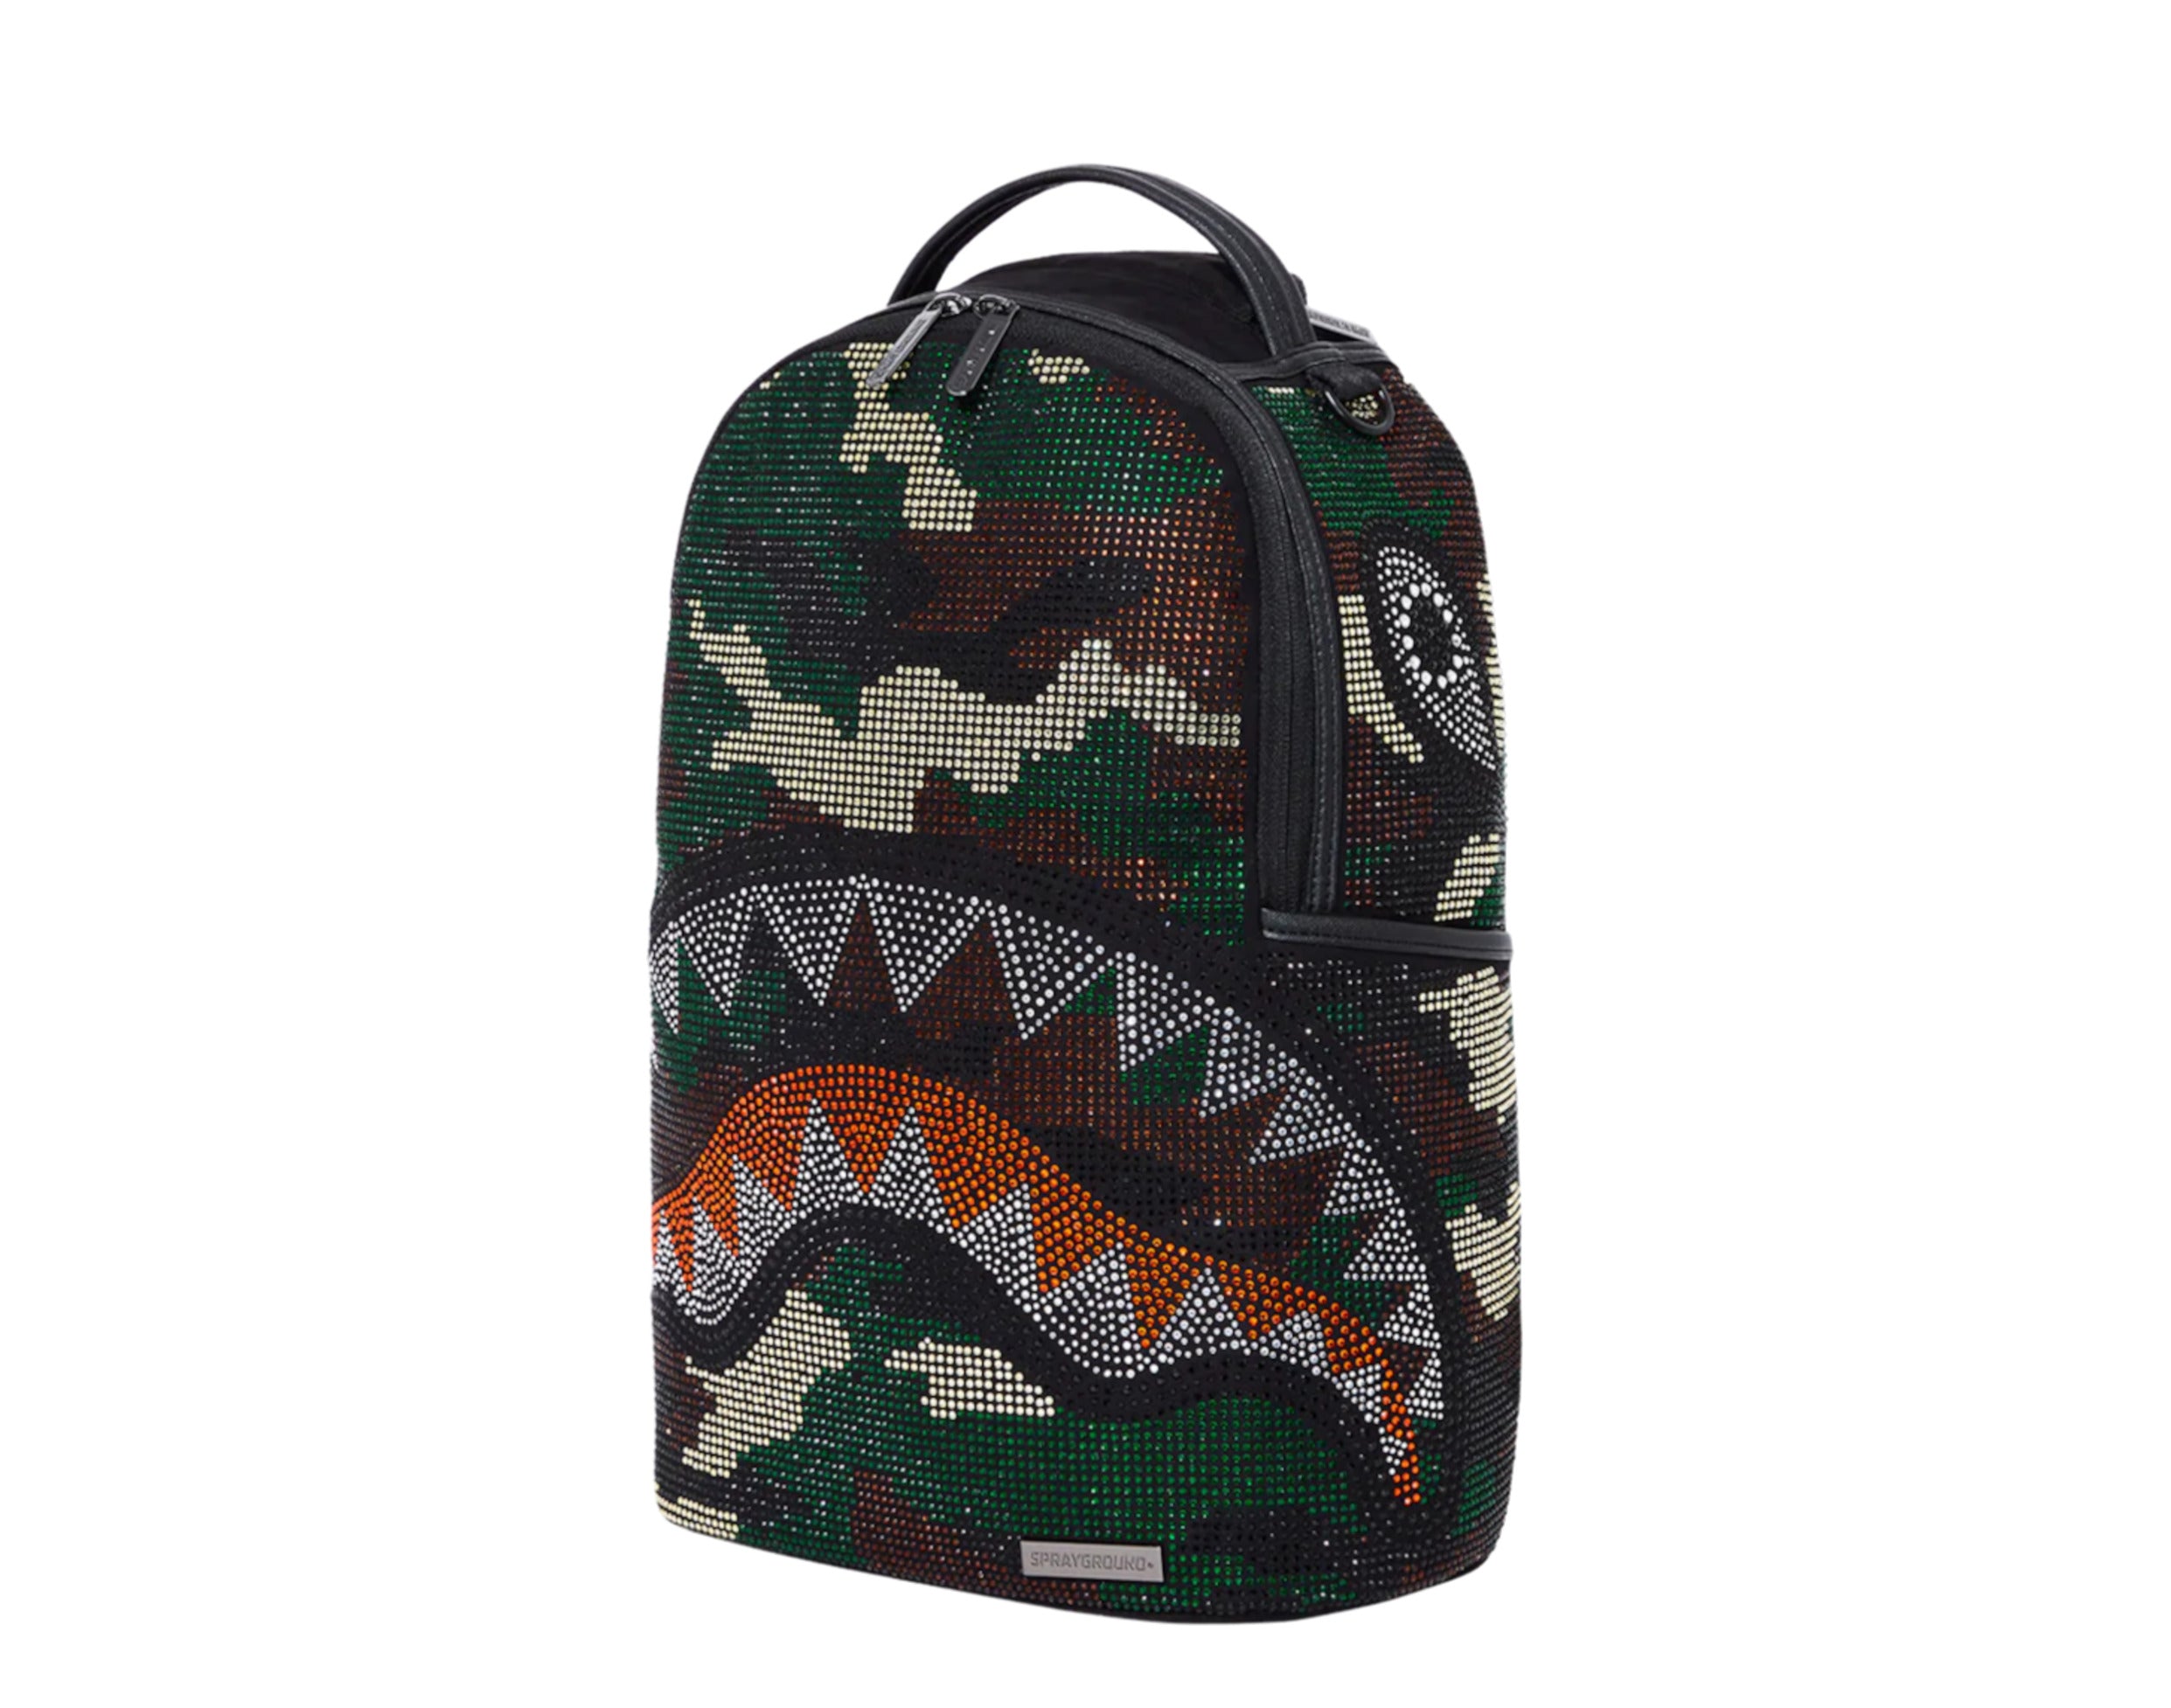 Sprayground Limited Edition Backpack for Sale in Fresno, CA